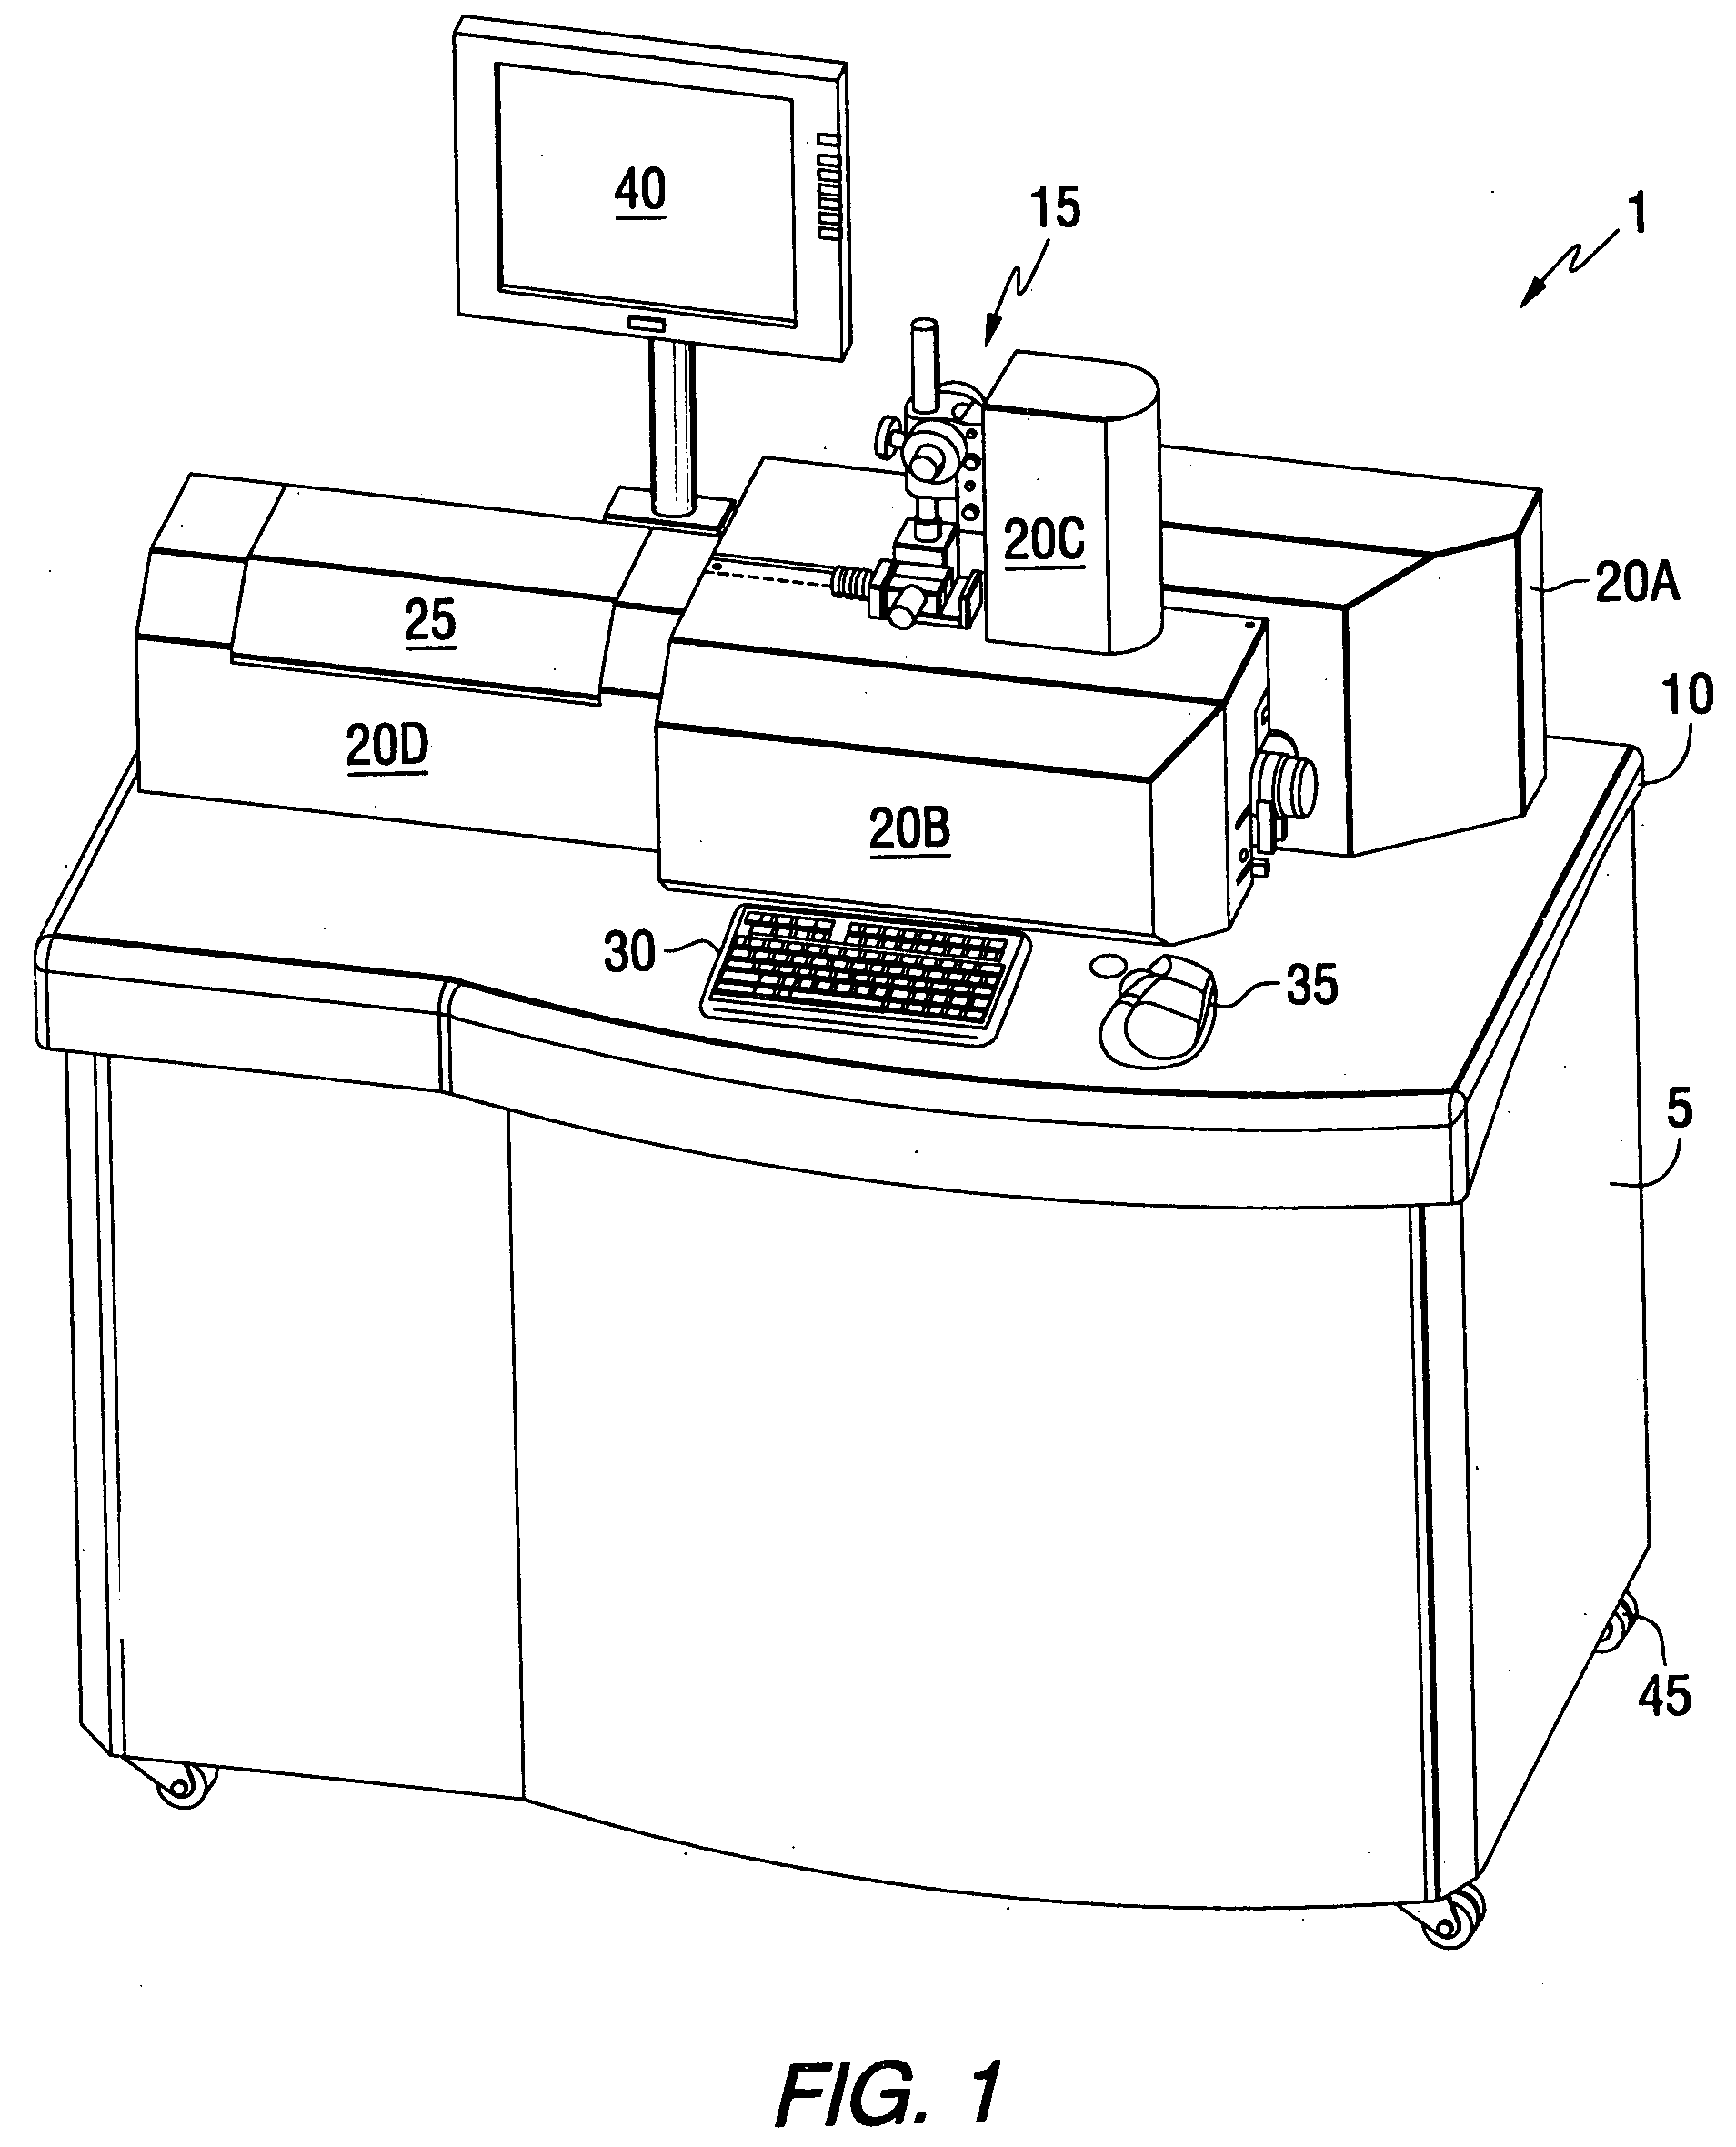 Device and method for milling of material using ions